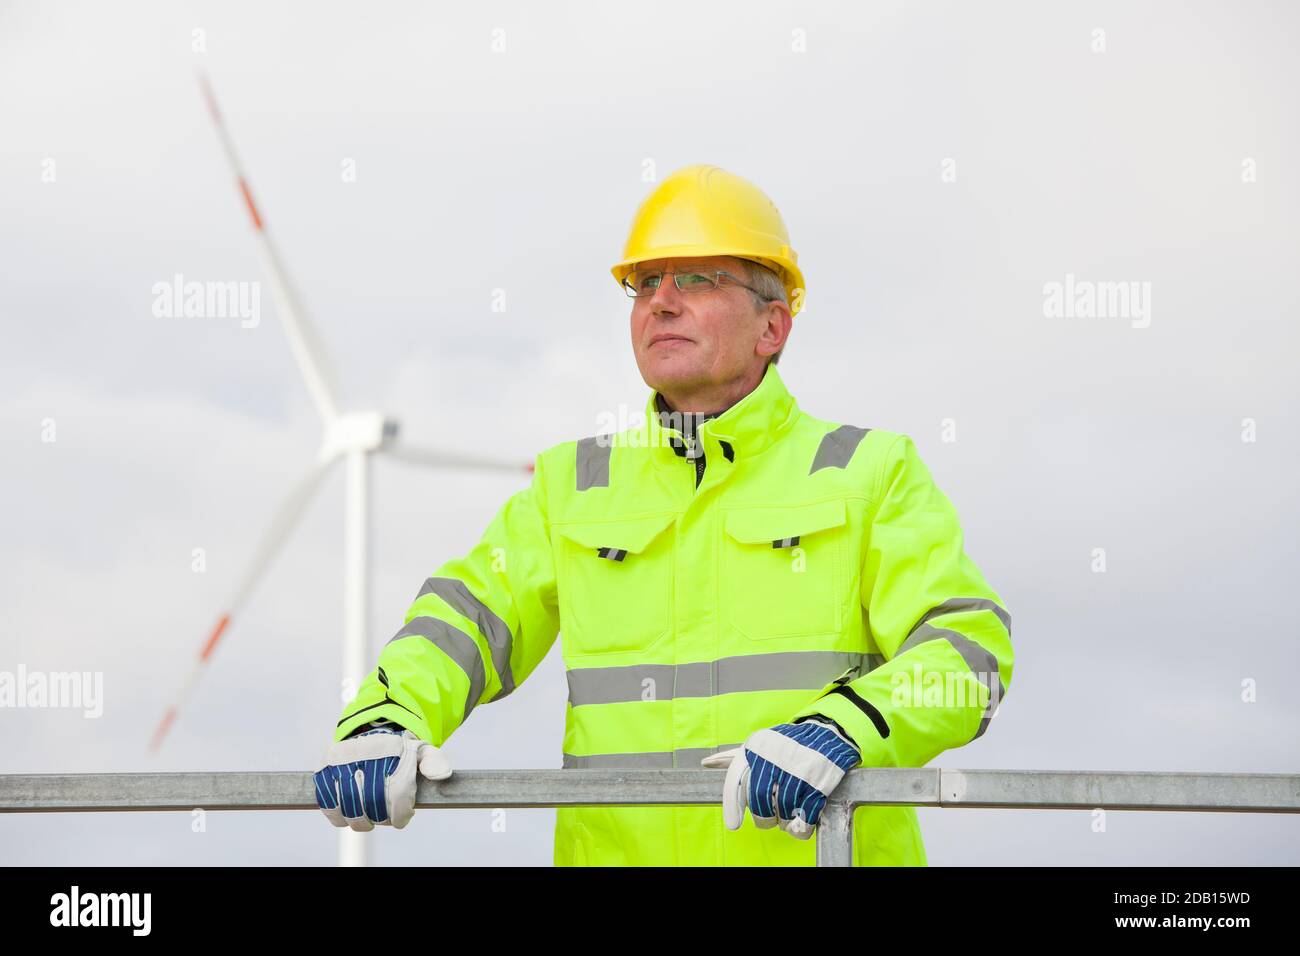 Mature engineer with hard hat and protective clothing in front of blurred wind turbine in the background Stock Photo